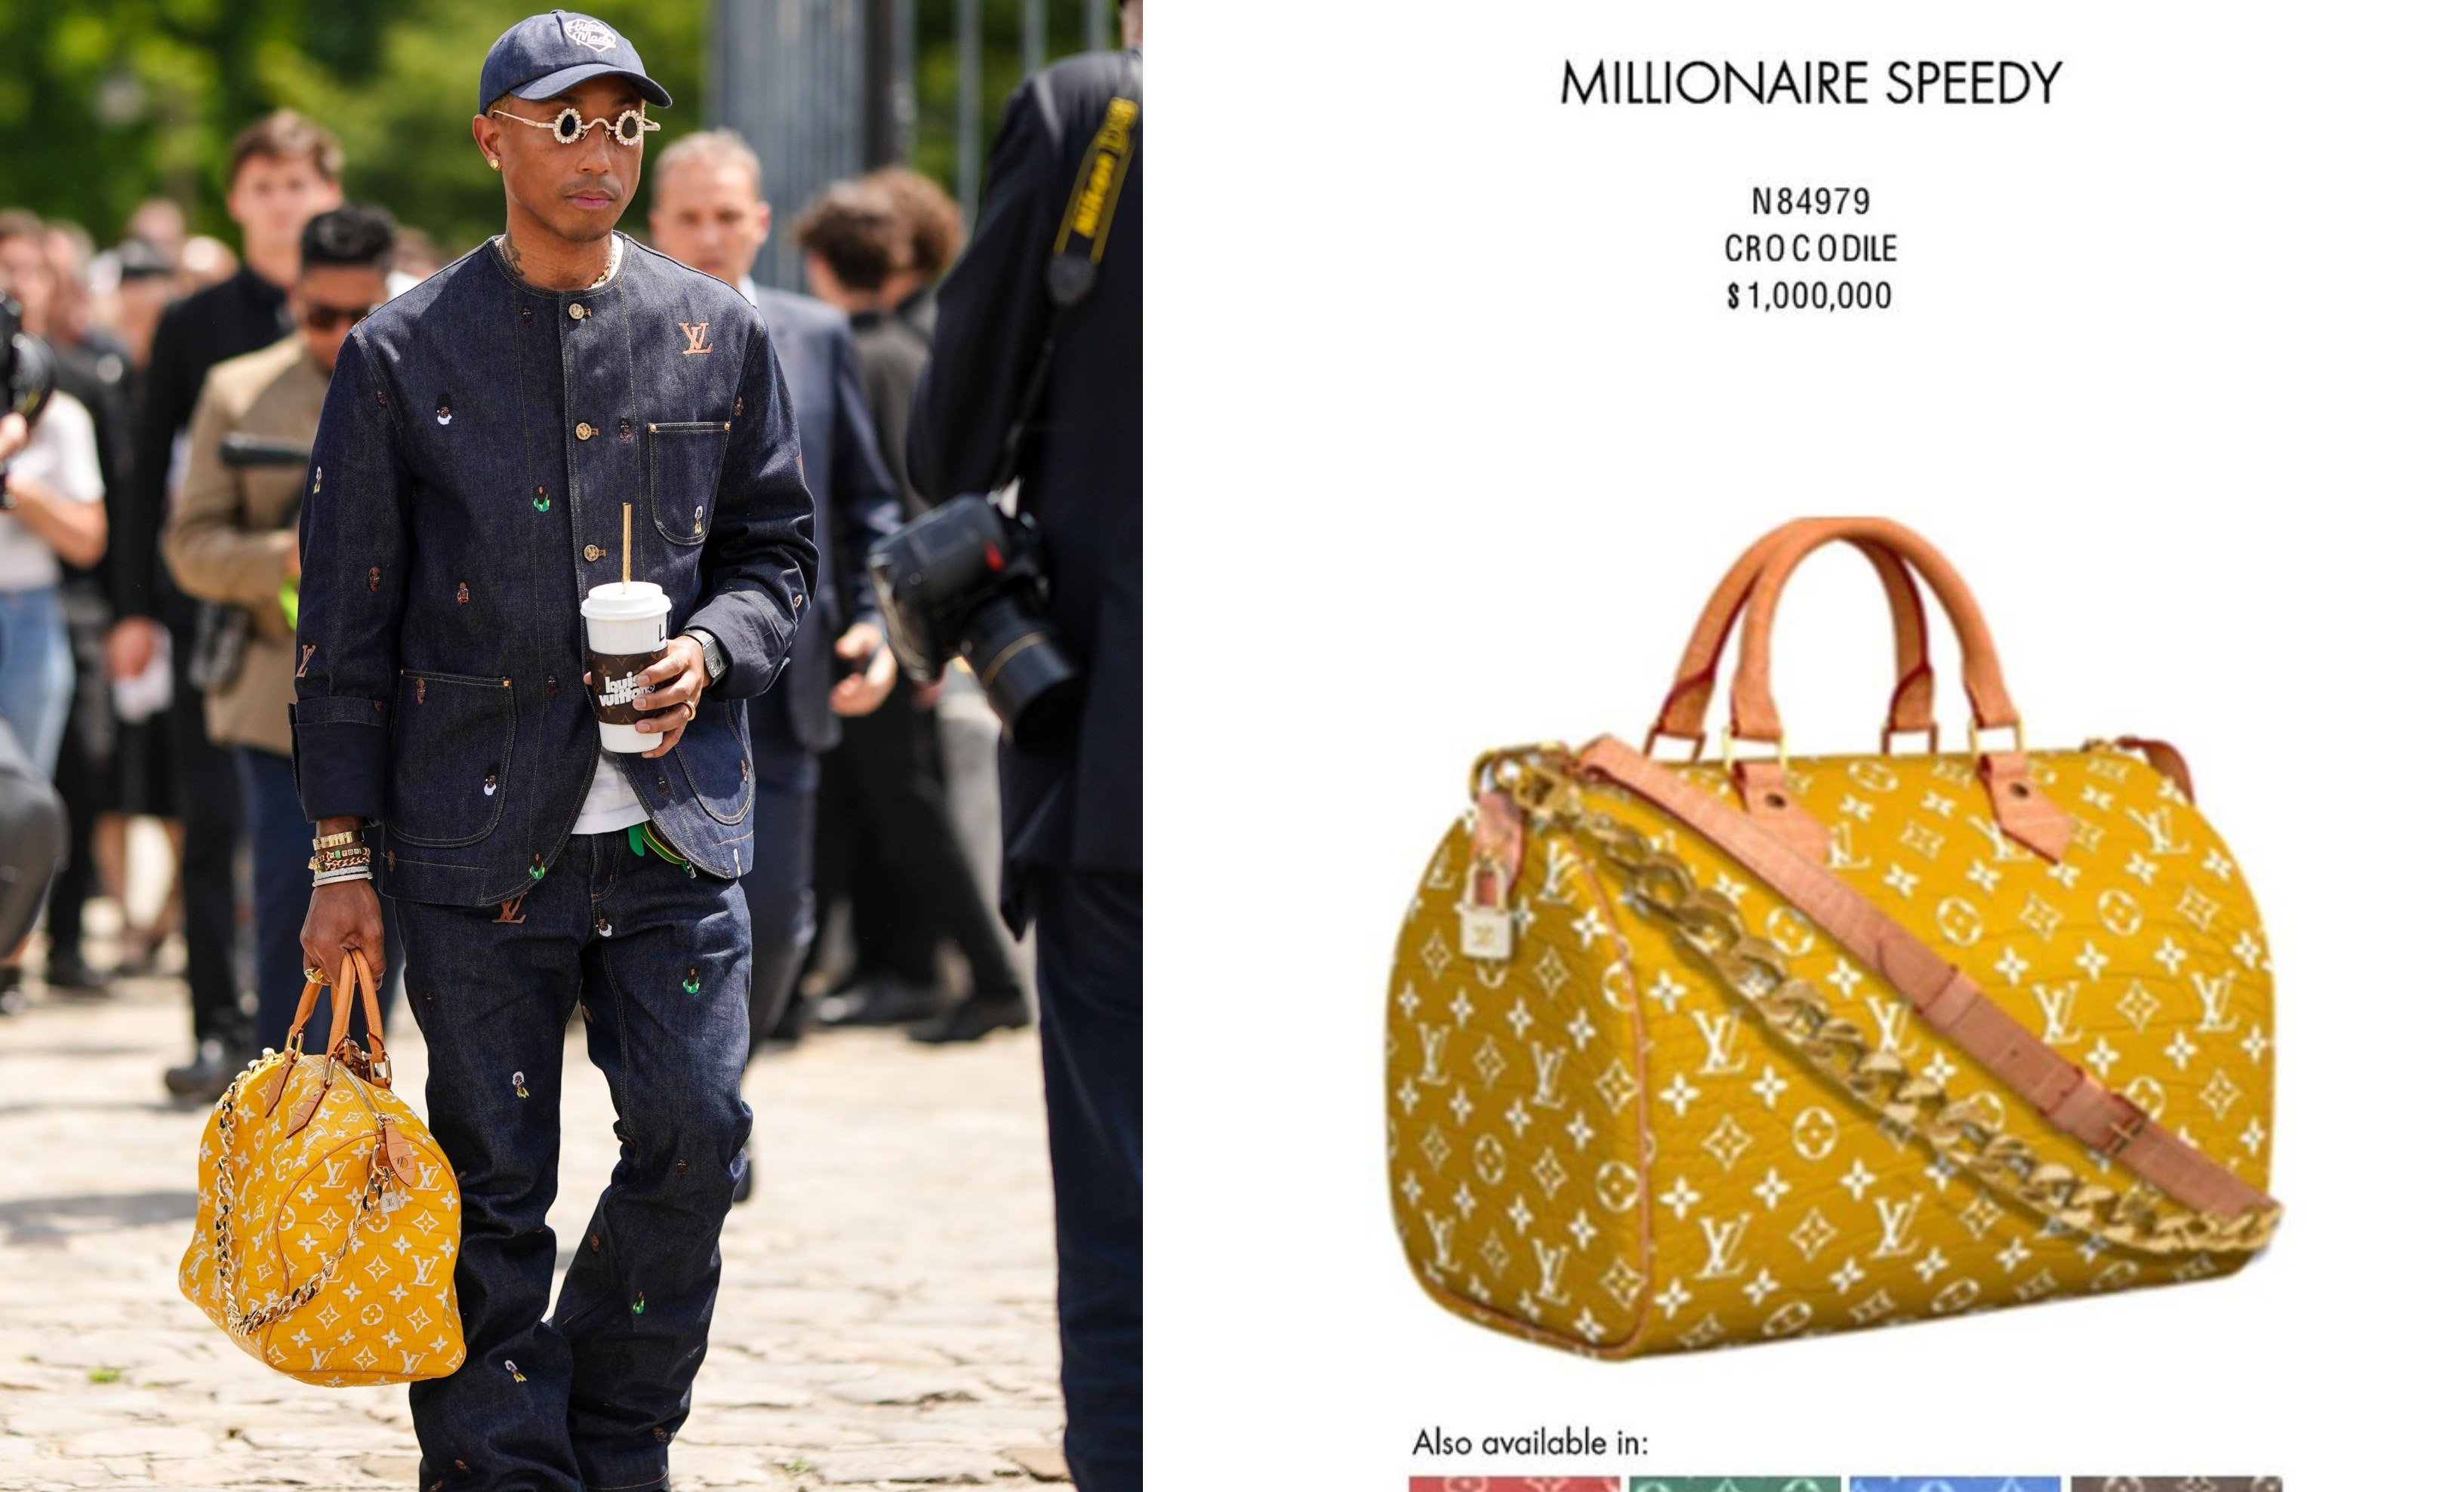 Louis Vuitton’s Millionaire Speedy bag designed by Pharrell Williams is now available – for a select few. Photos: Getty Images; @pjtucker/Instagram